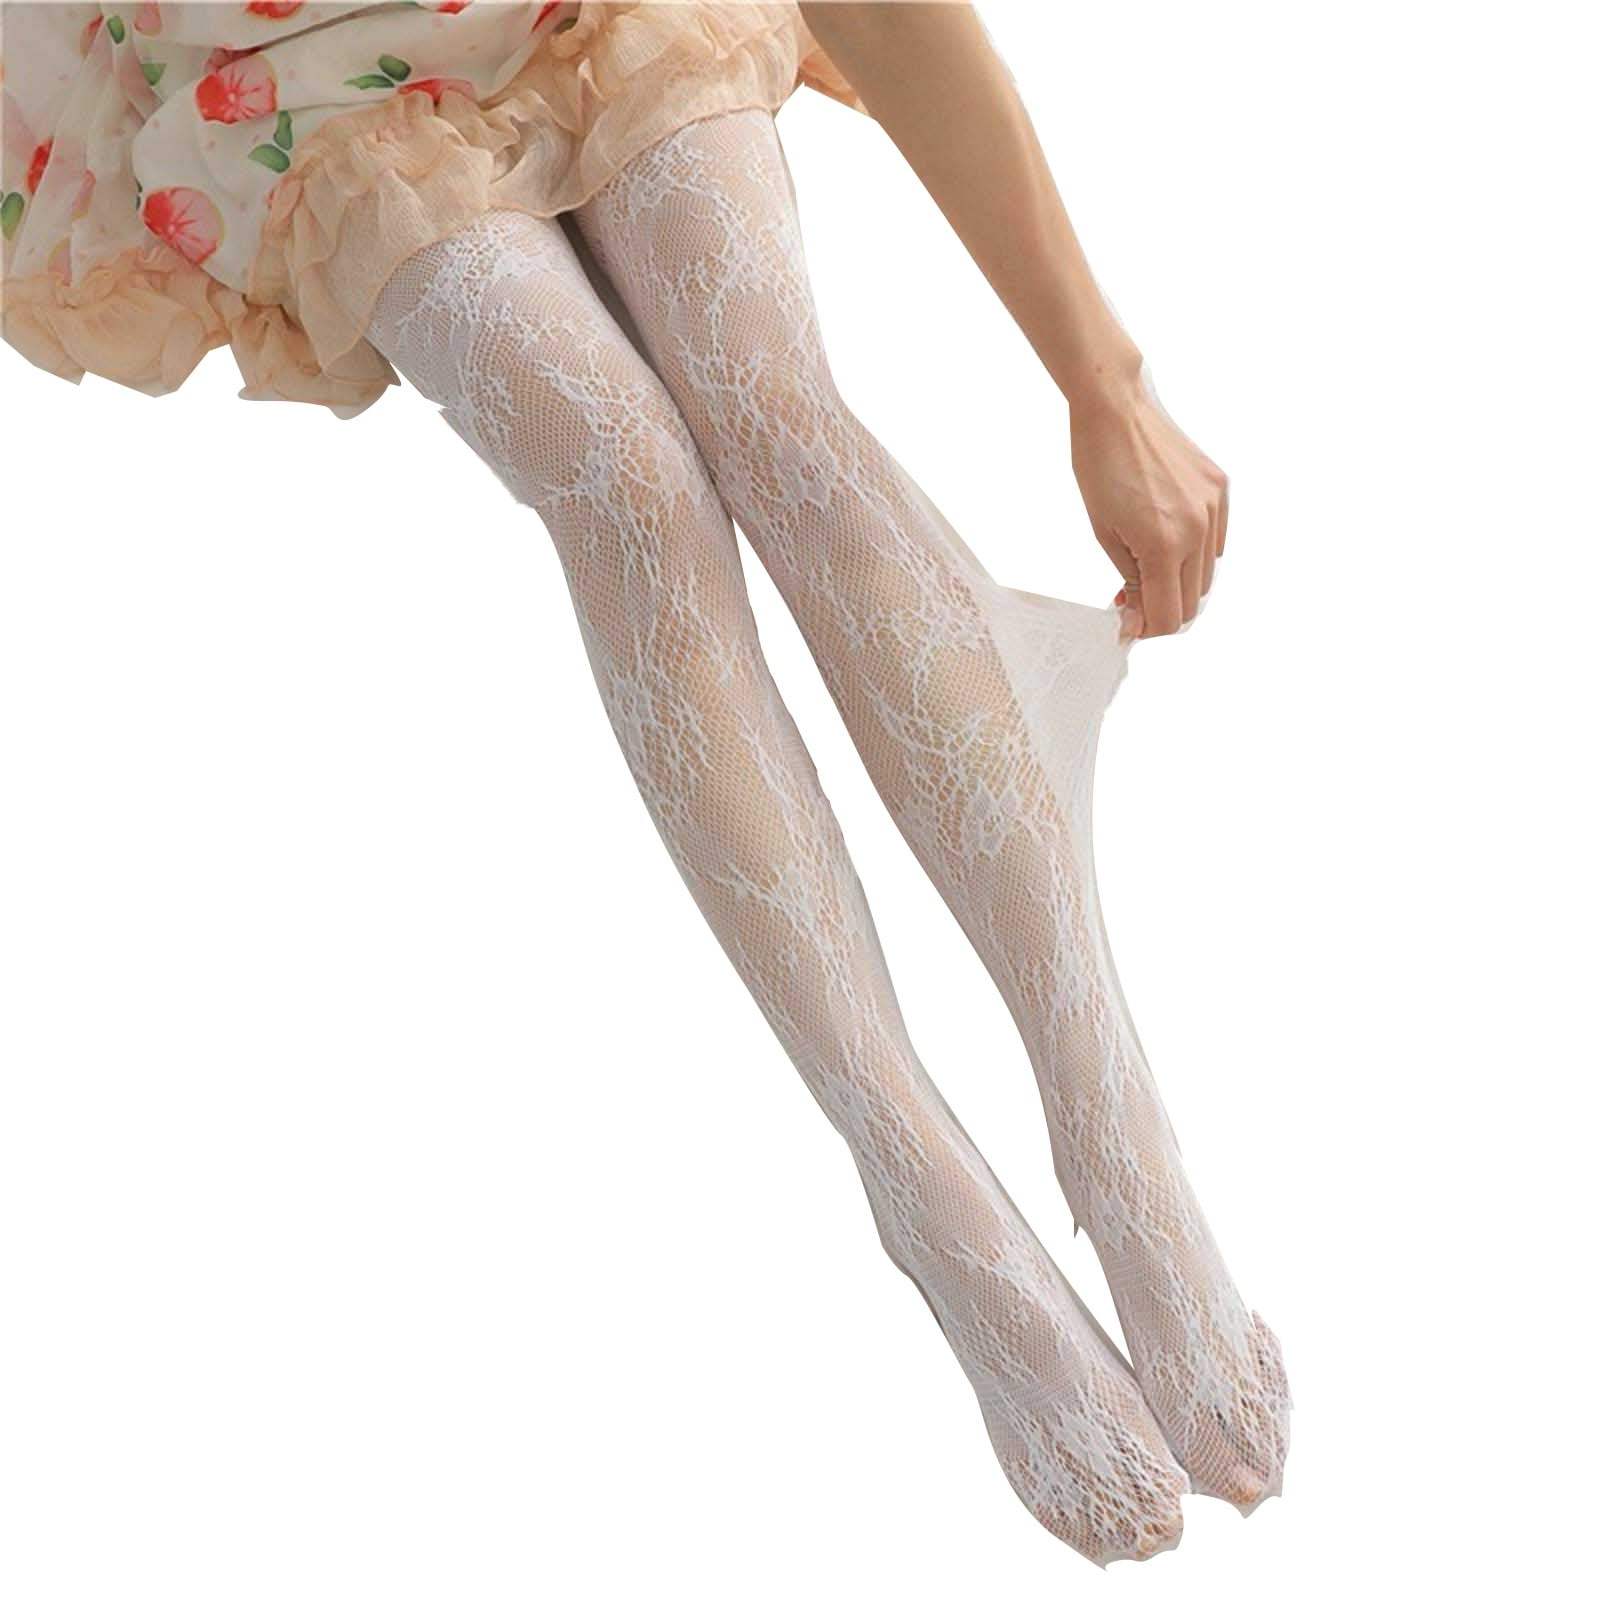 YUEHAO accessories Women's Pattern Tights Fishnet Ribbon Floral Print  Pantyhose Stockings Seggings Free Size (without Panties) Tights White 